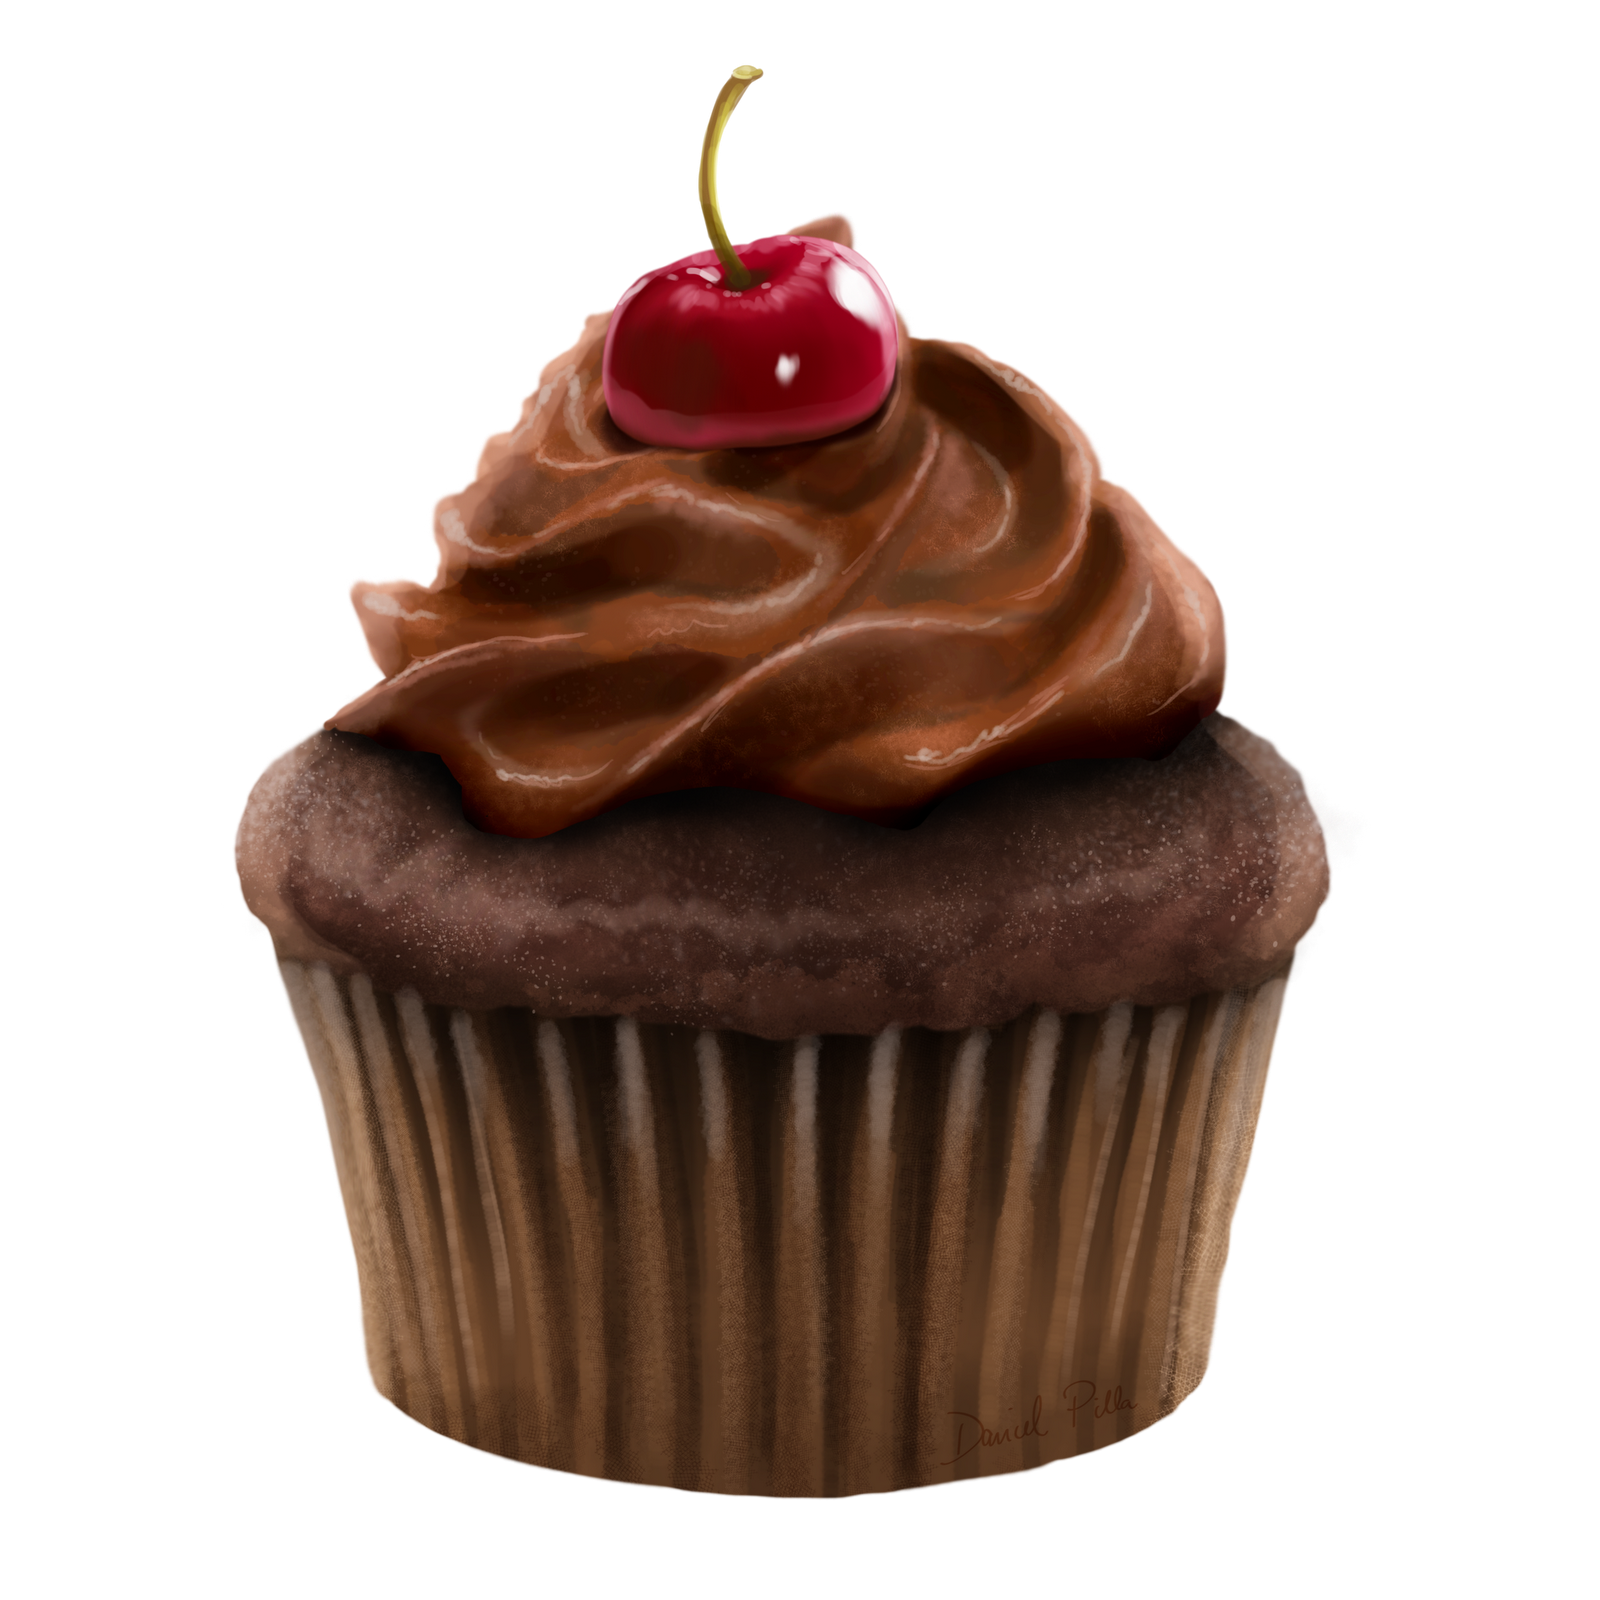 0 cupcake clip art images on 